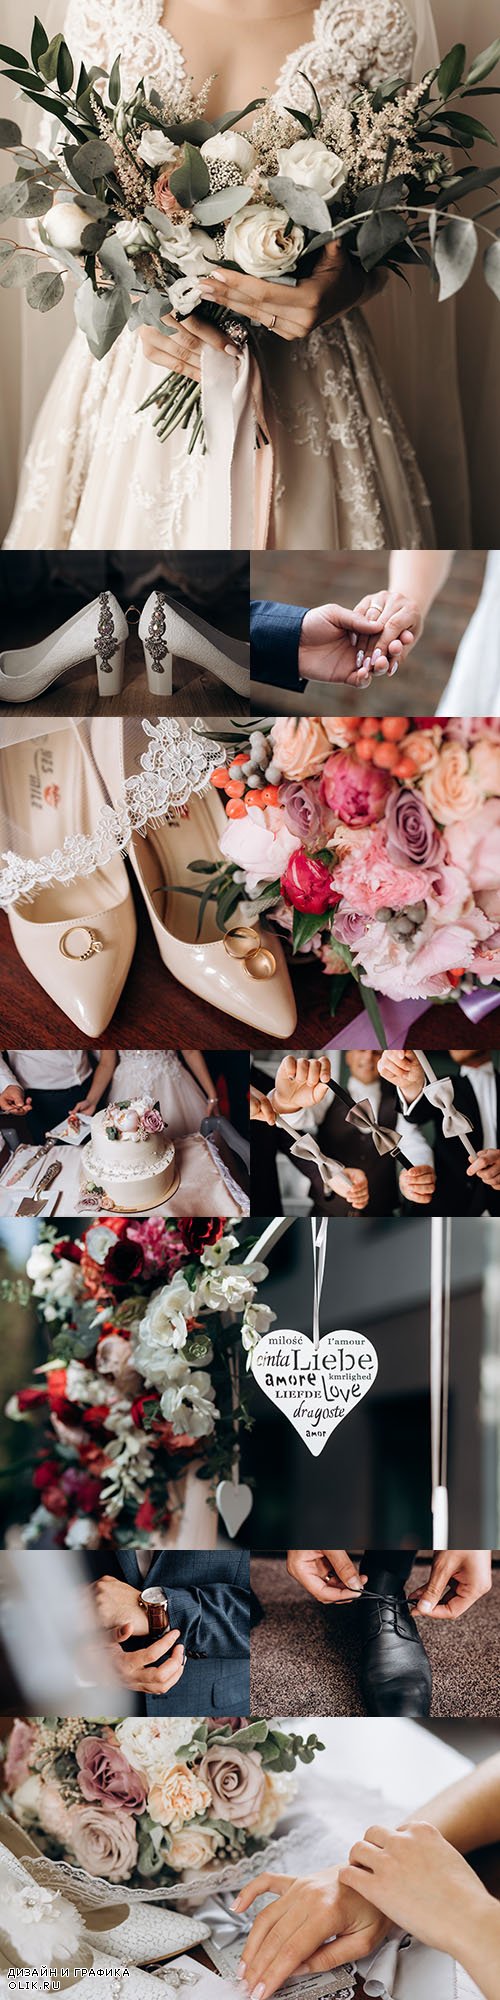 Bride's wedding bouquet, shoes and clothing attributes